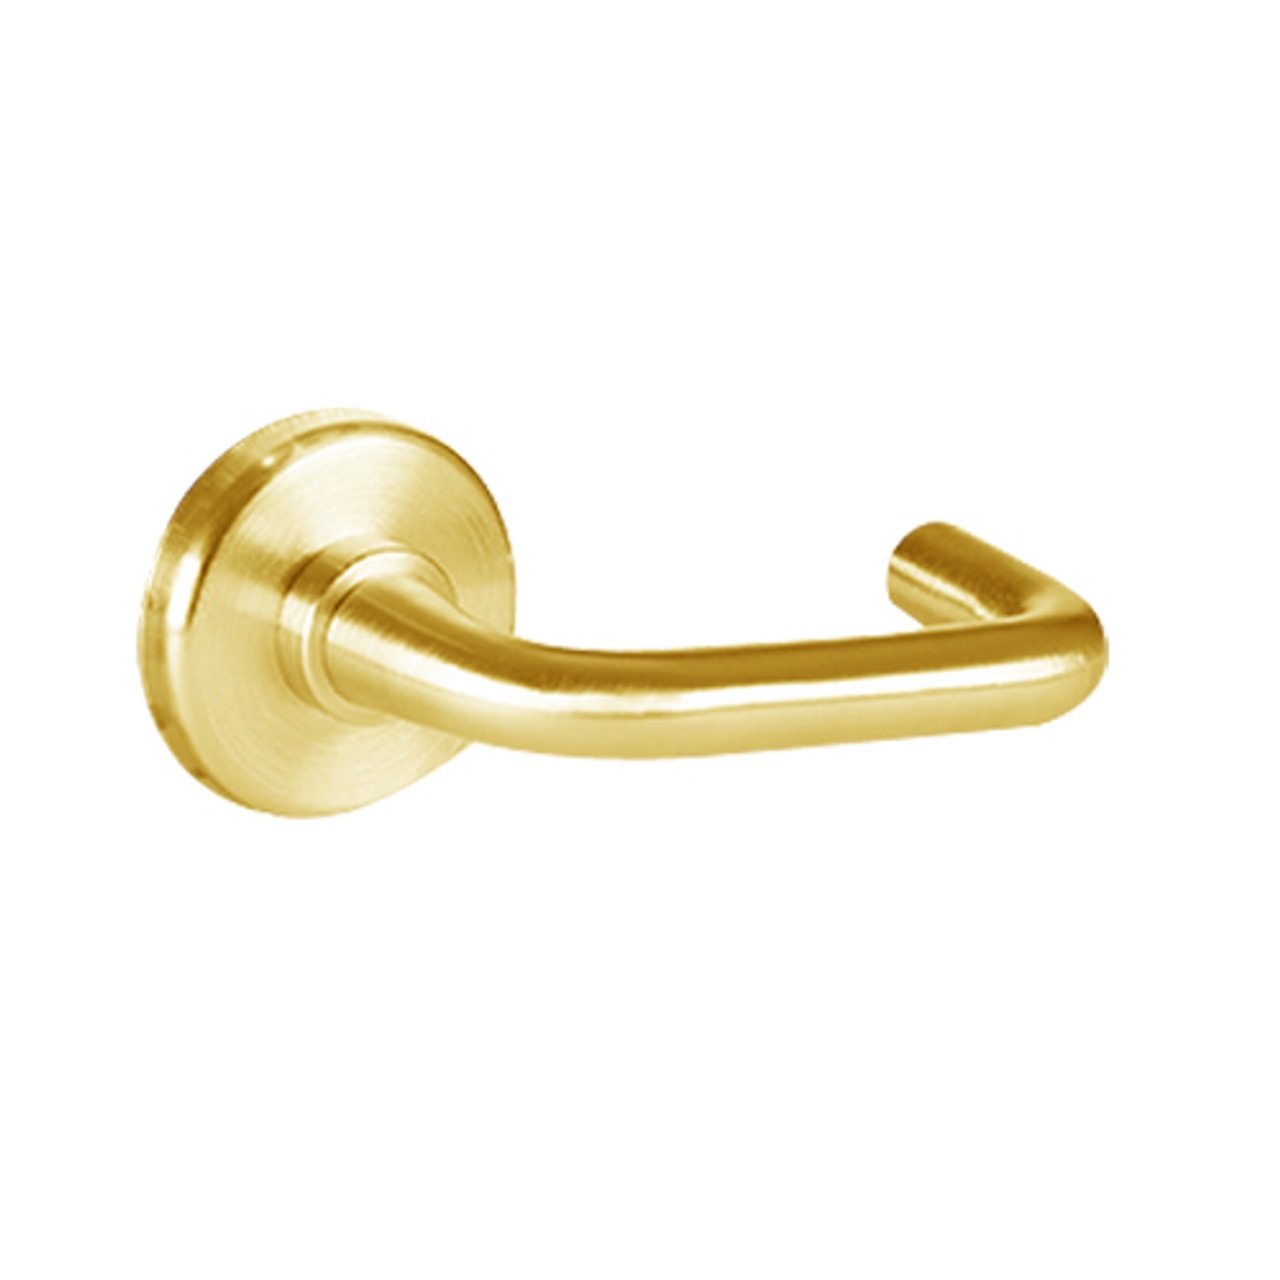 40HTKOS23R605 Best 40H Series Trim Kits Outside Lever w/ Cylinder with Solid Tube-Return Trim Style in Bright Brass